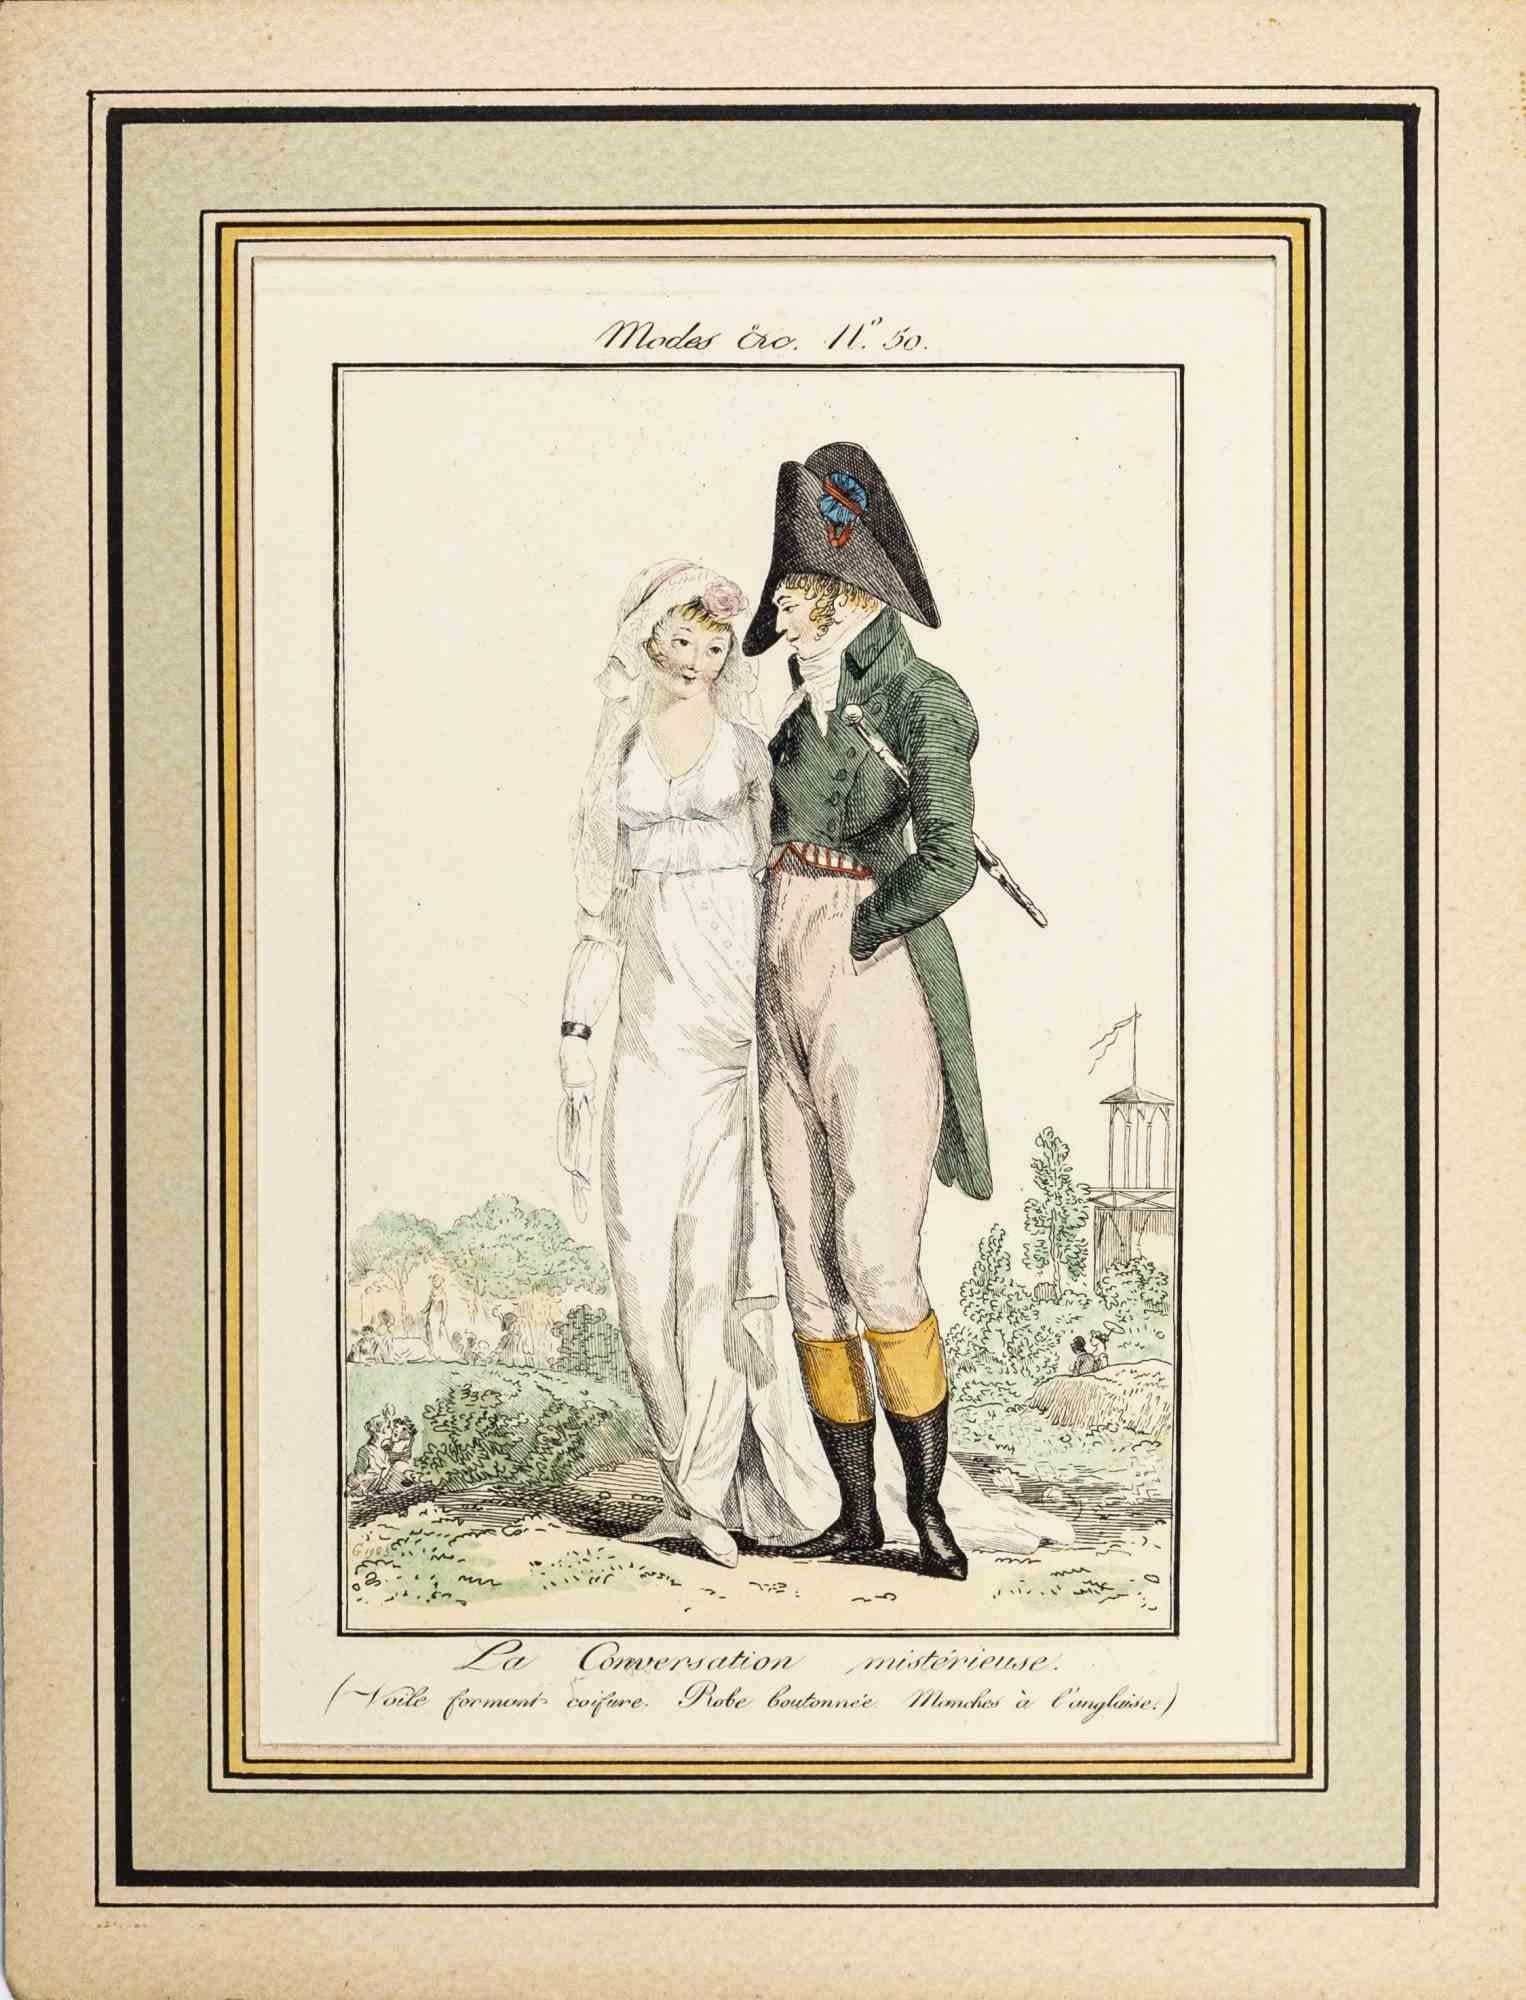 La Converation Mistérieuse is an Original Etching Hand Watercolored series "Modes Ac." published in 1797 by the Journald des Dames et des Modes".

Mode et Manières - Model n.  is 50 an original watercolored print realized in 1797. 

The artwork is